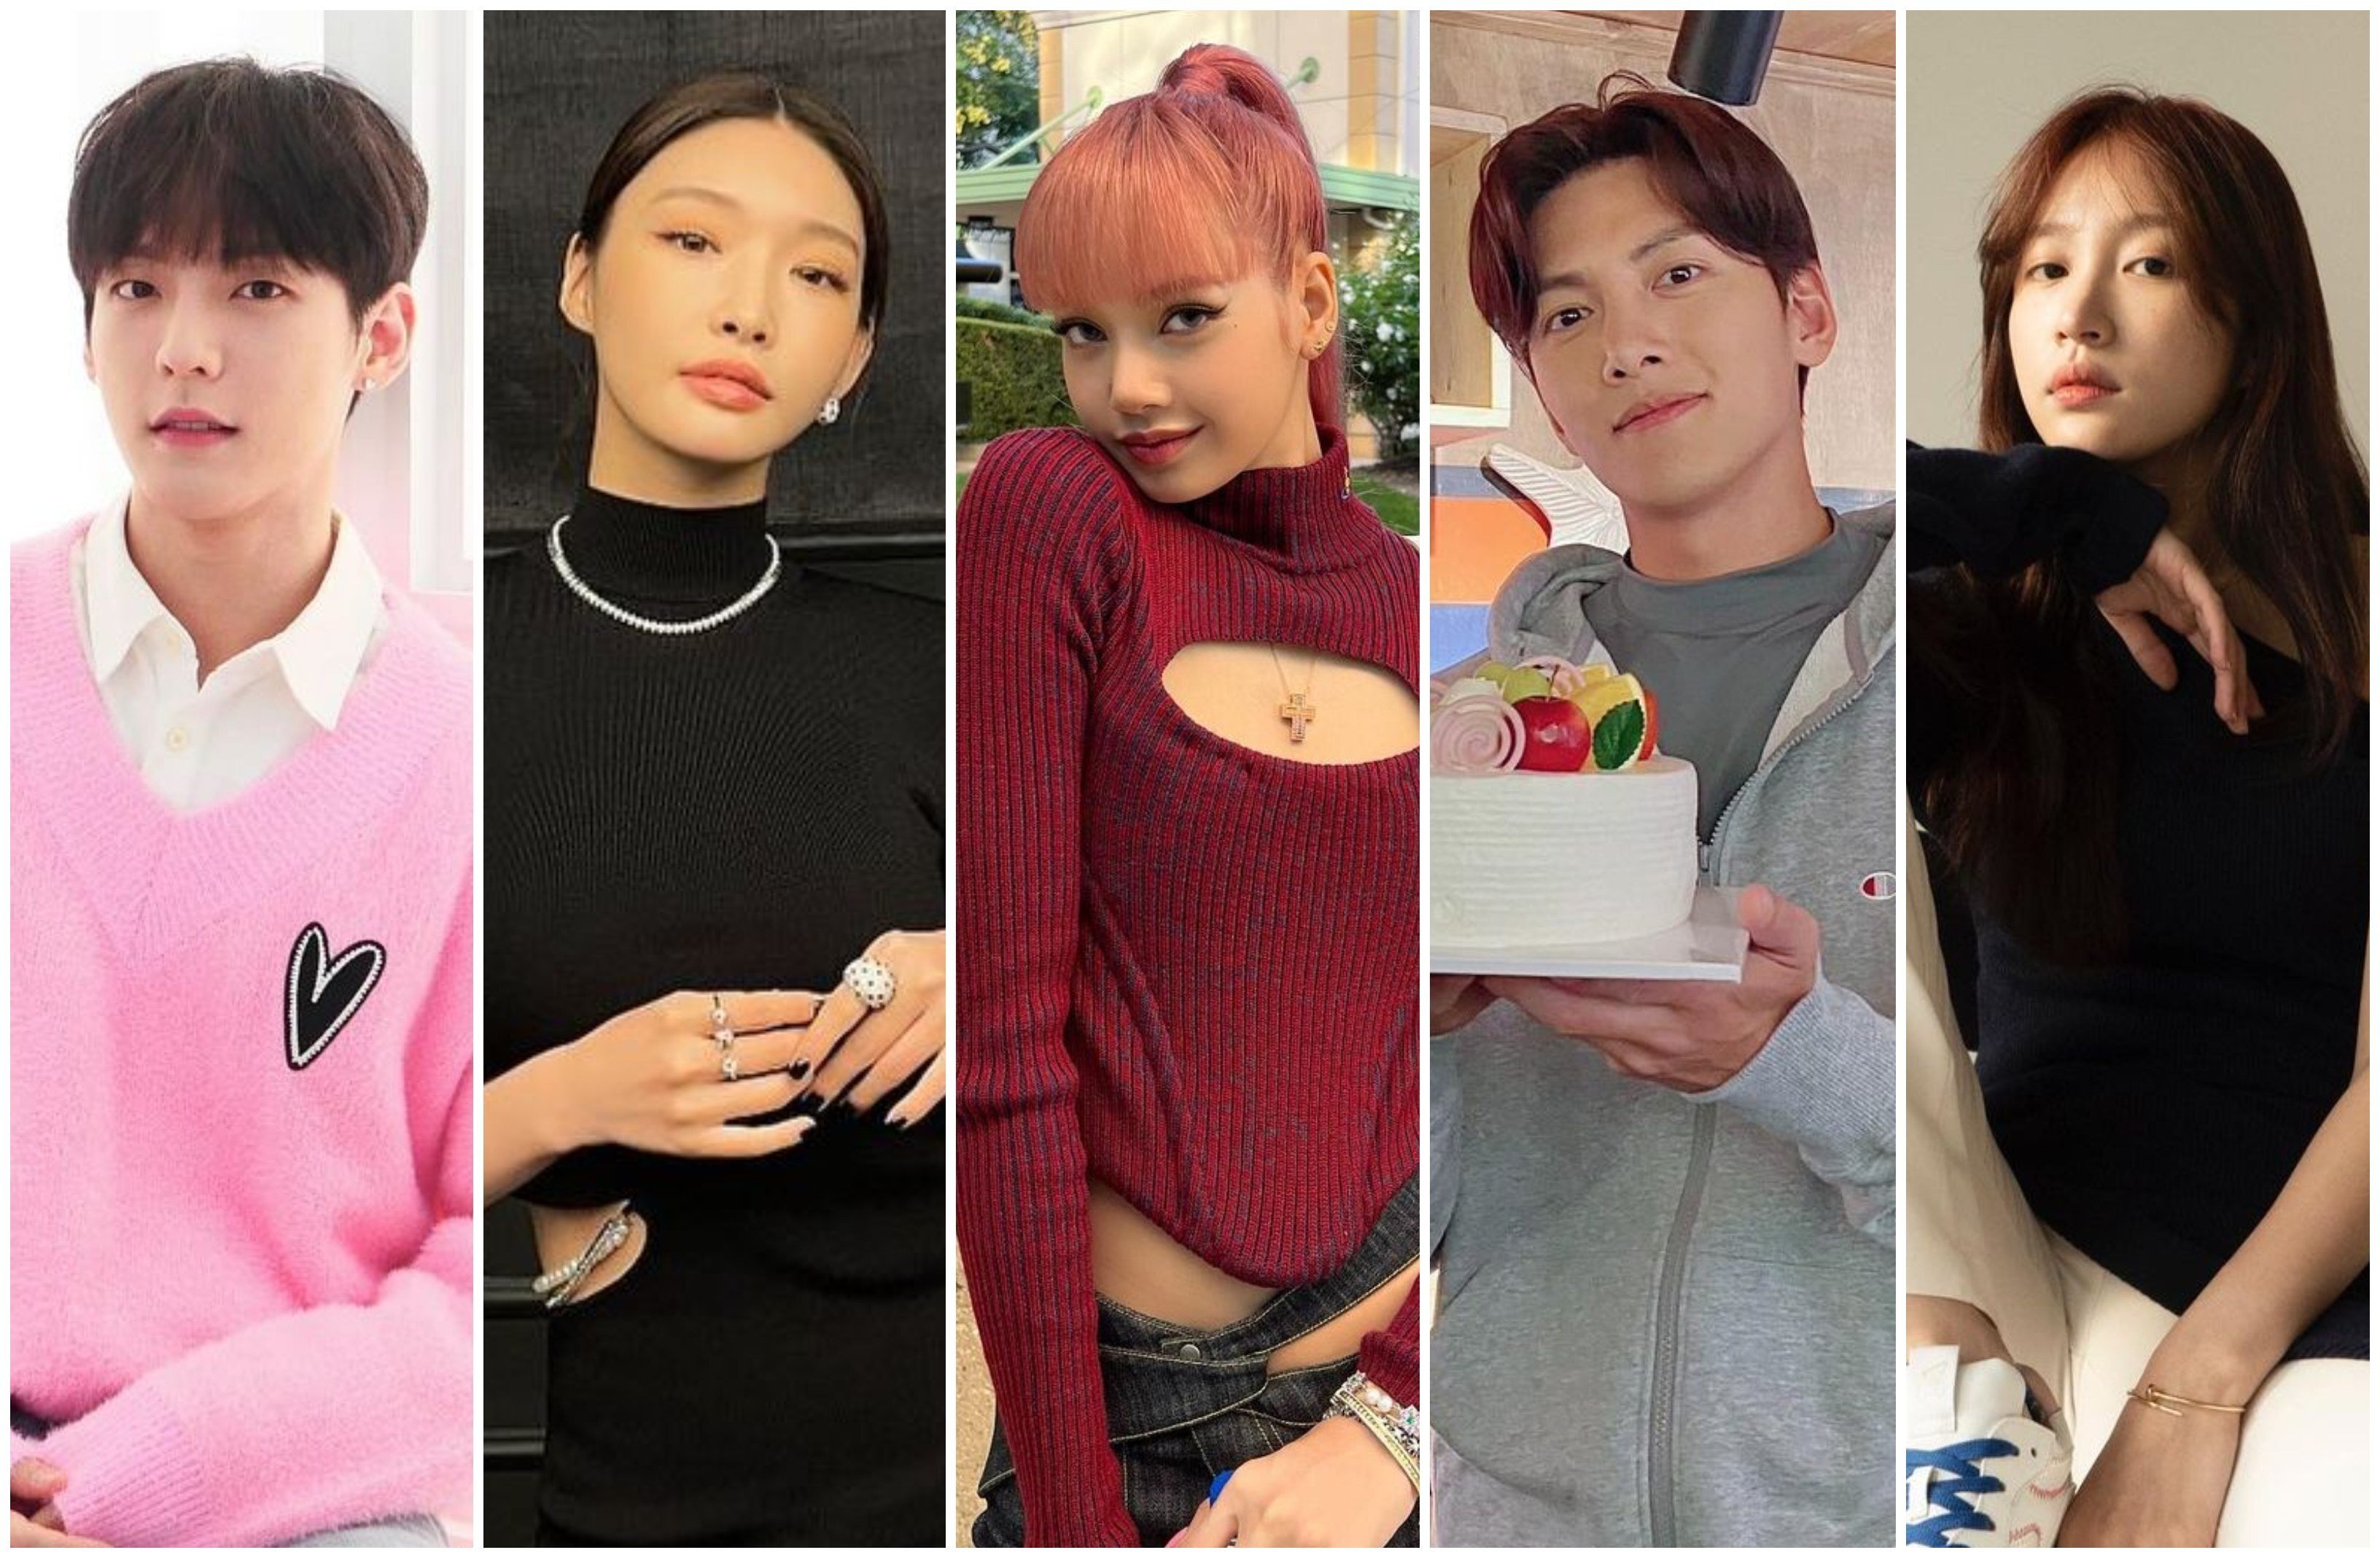 No one escapes Covid-19 it seems, not even our favourite K-celebs. Photos: @hutazone/Instagram, @chungha_official/Instagram, @lalalalisa_m/Instagram, @jichangwook/Instagram, @ahnhanihh/Instagram